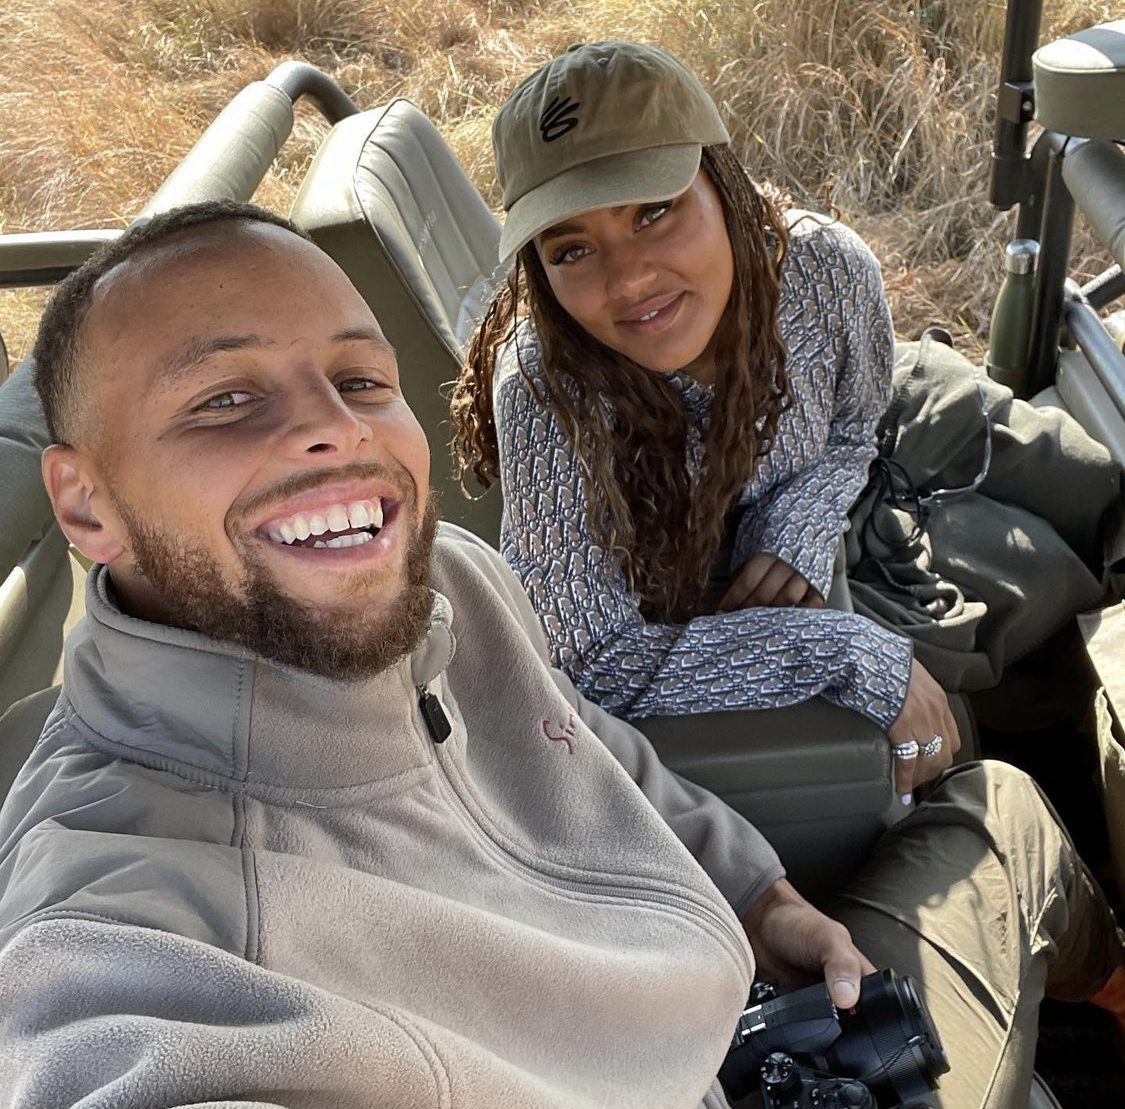 Steph, Ayesha Curry oppose multifamily home development near them